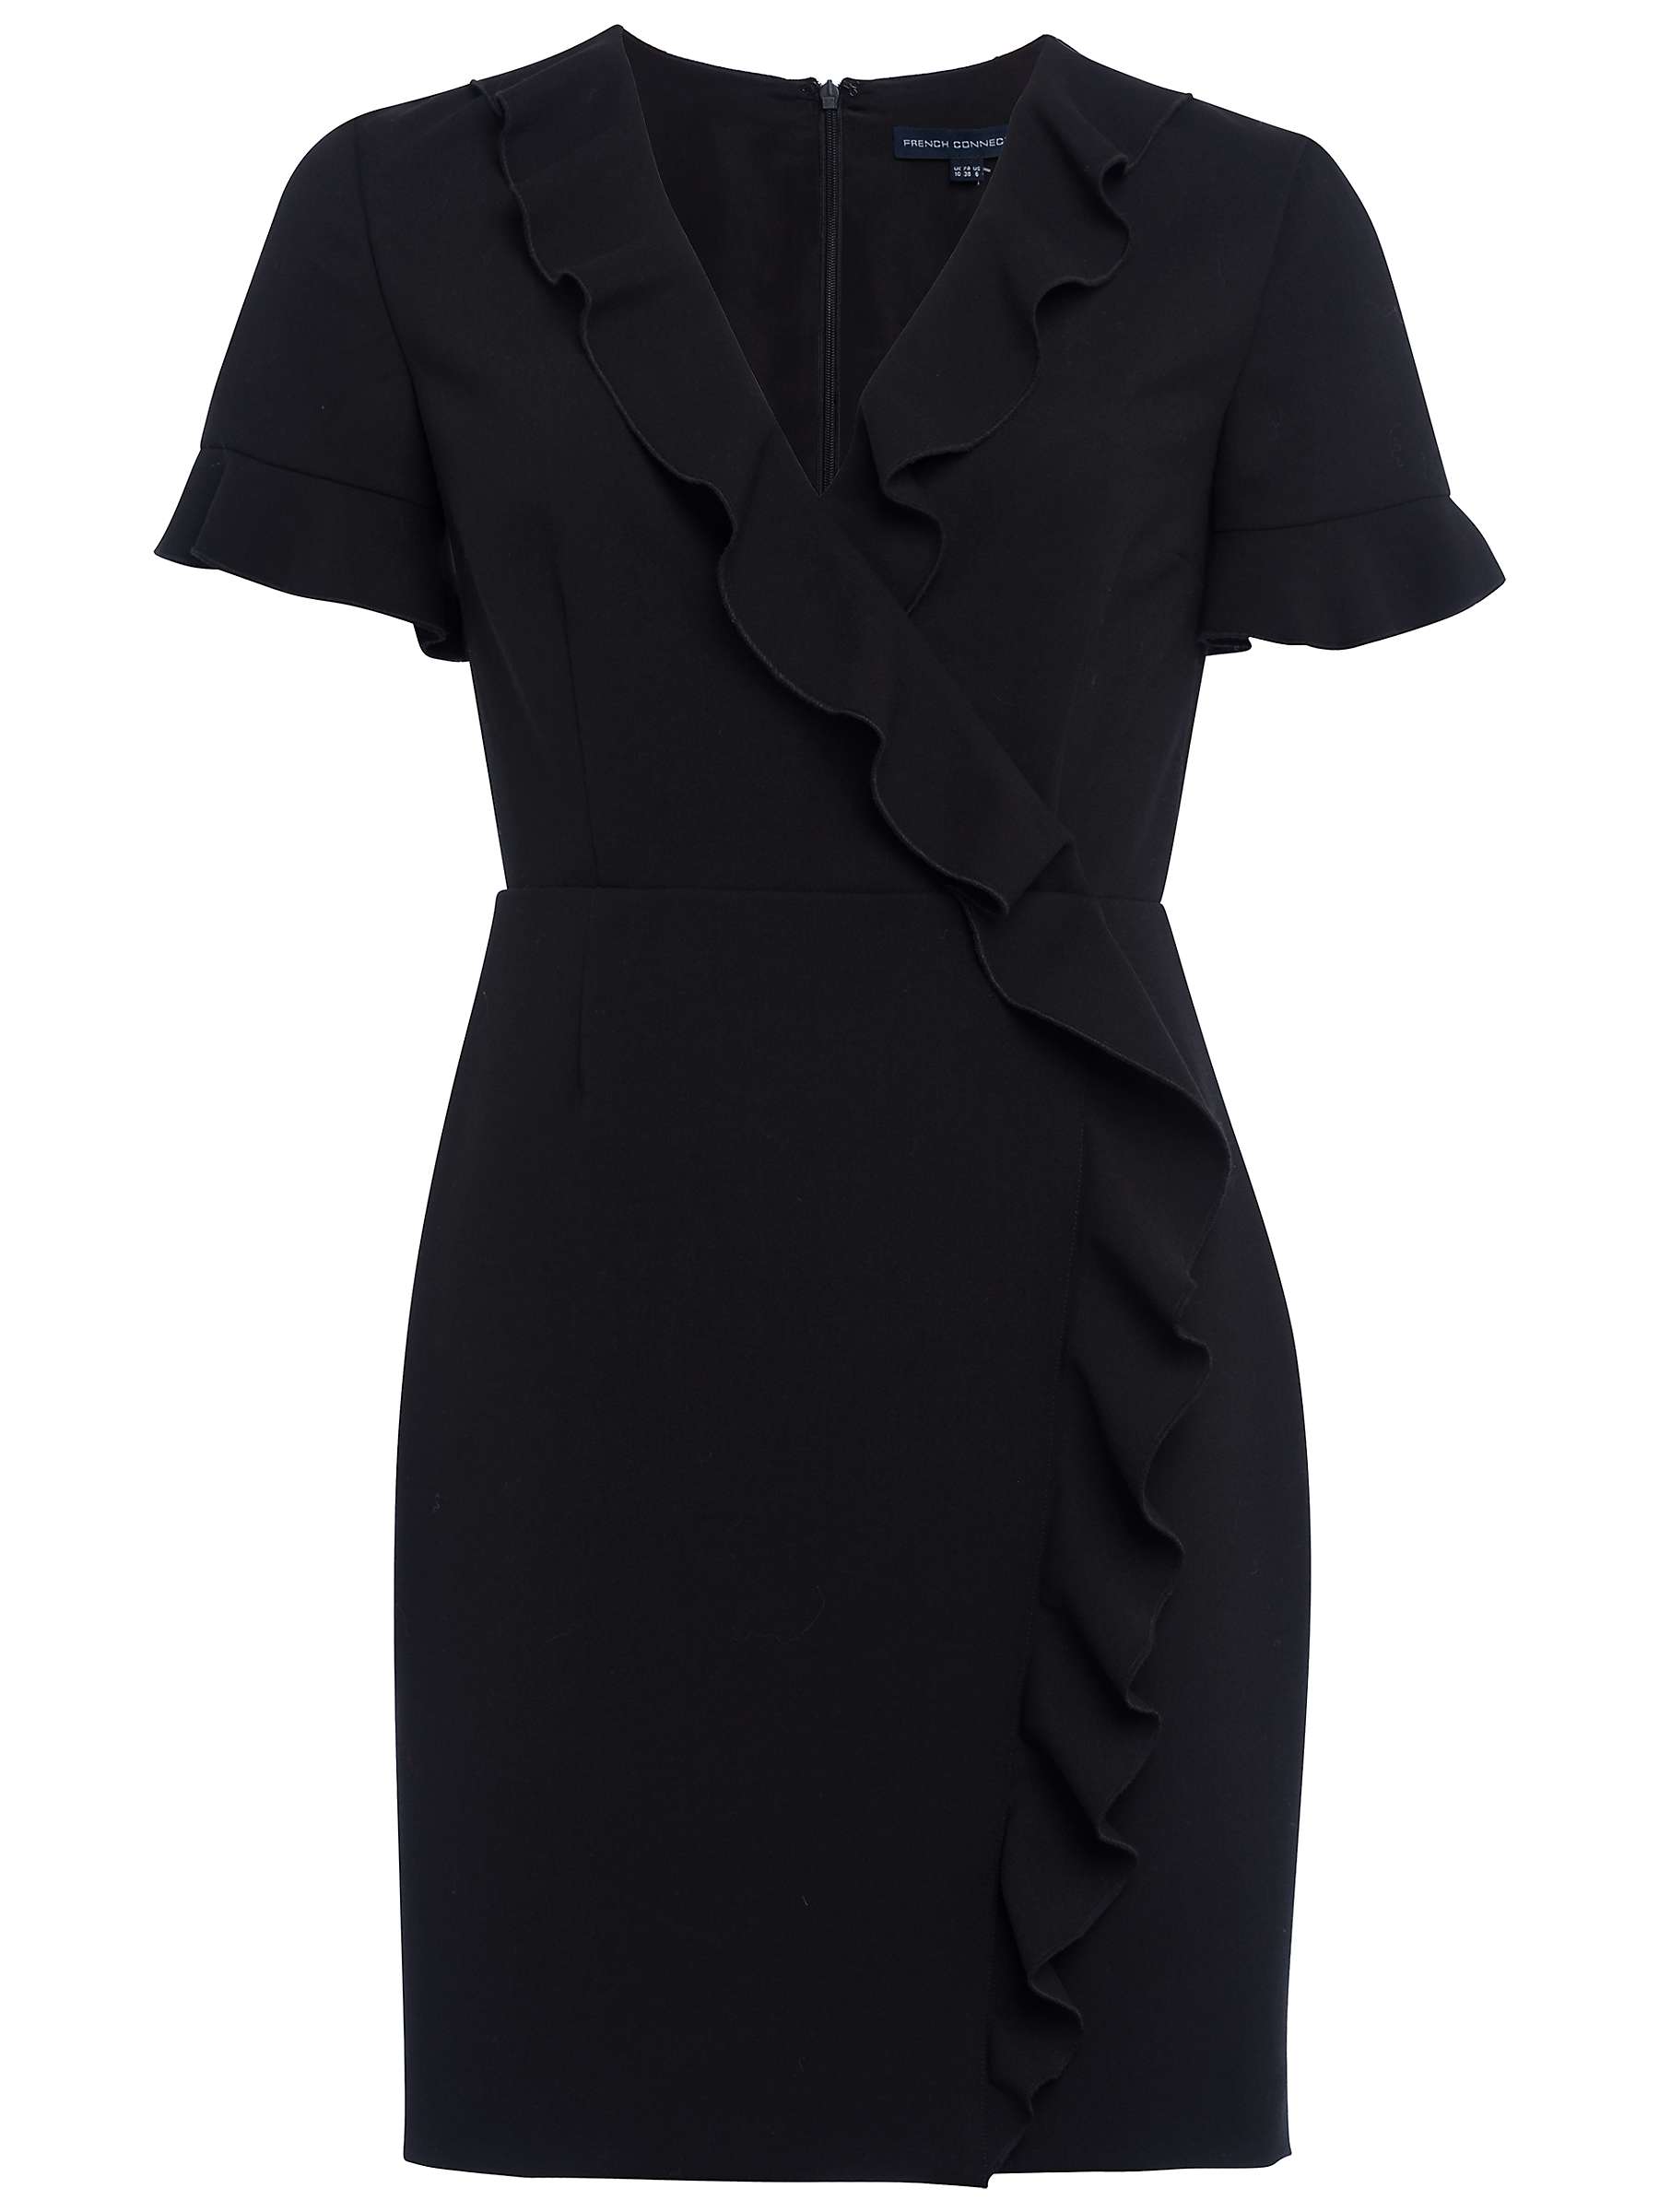 Buy French Connection Stretch Frill Dress Online at johnlewis.com